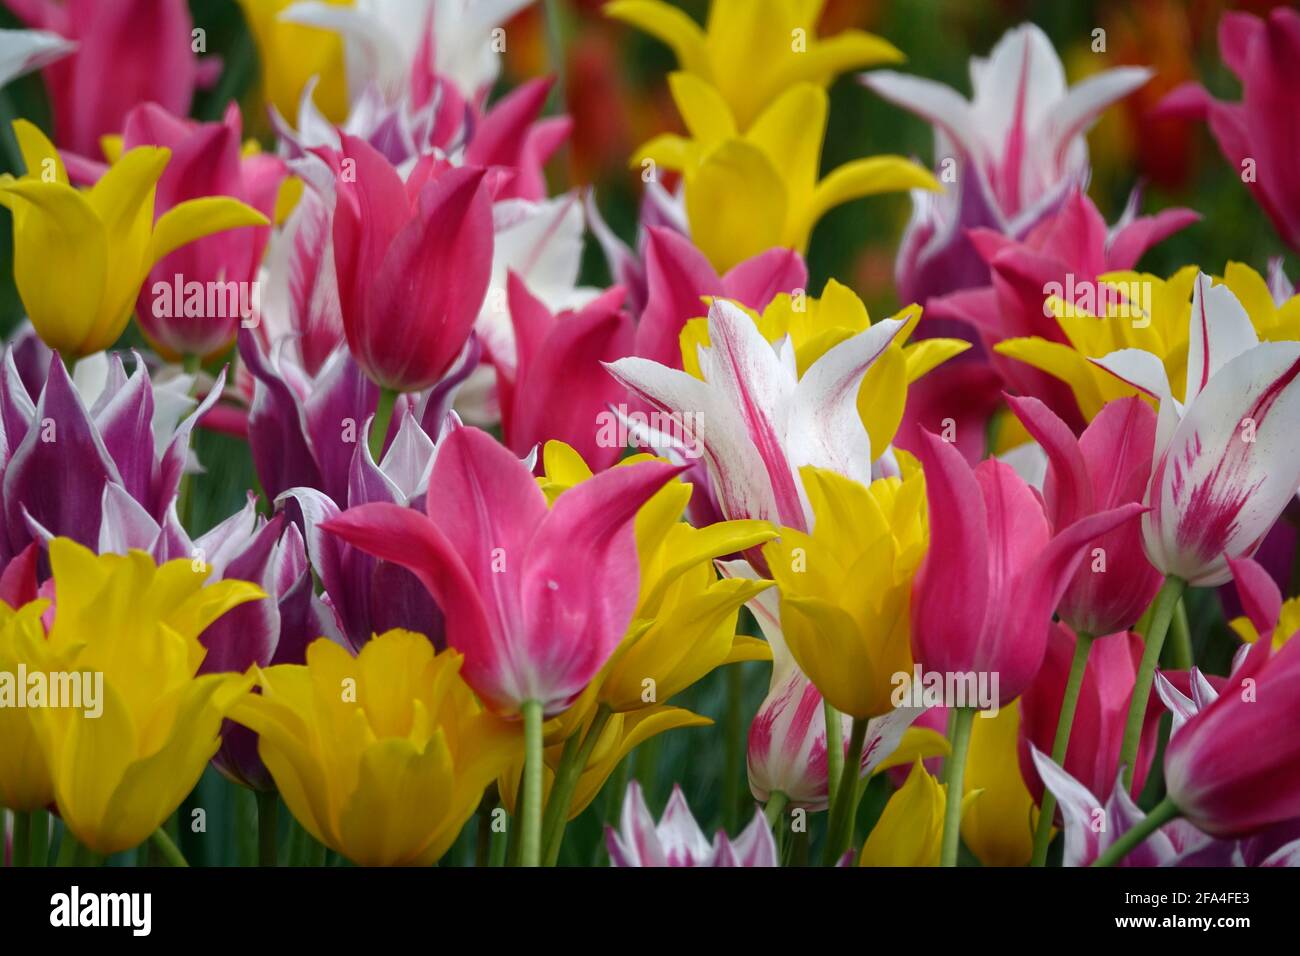 A Colorful Arrangement of Species Tulips in Pink, Yellow, and Striped Color Varieties Stock Photo